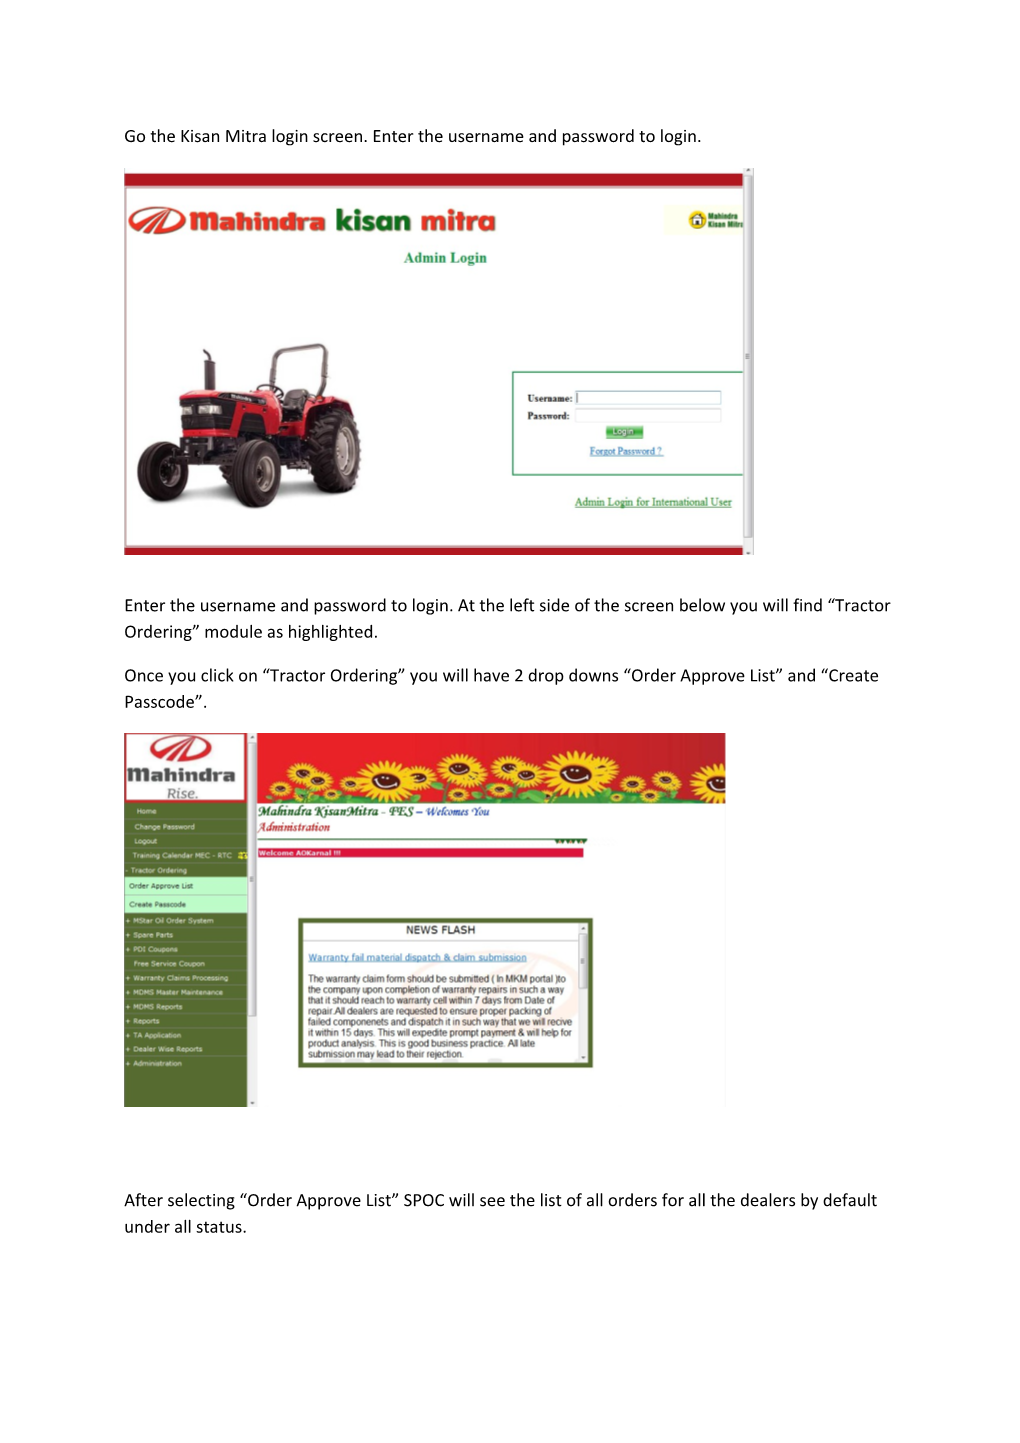 Go the Kisan Mitra Login Screen. Enter the Username and Password to Login s1